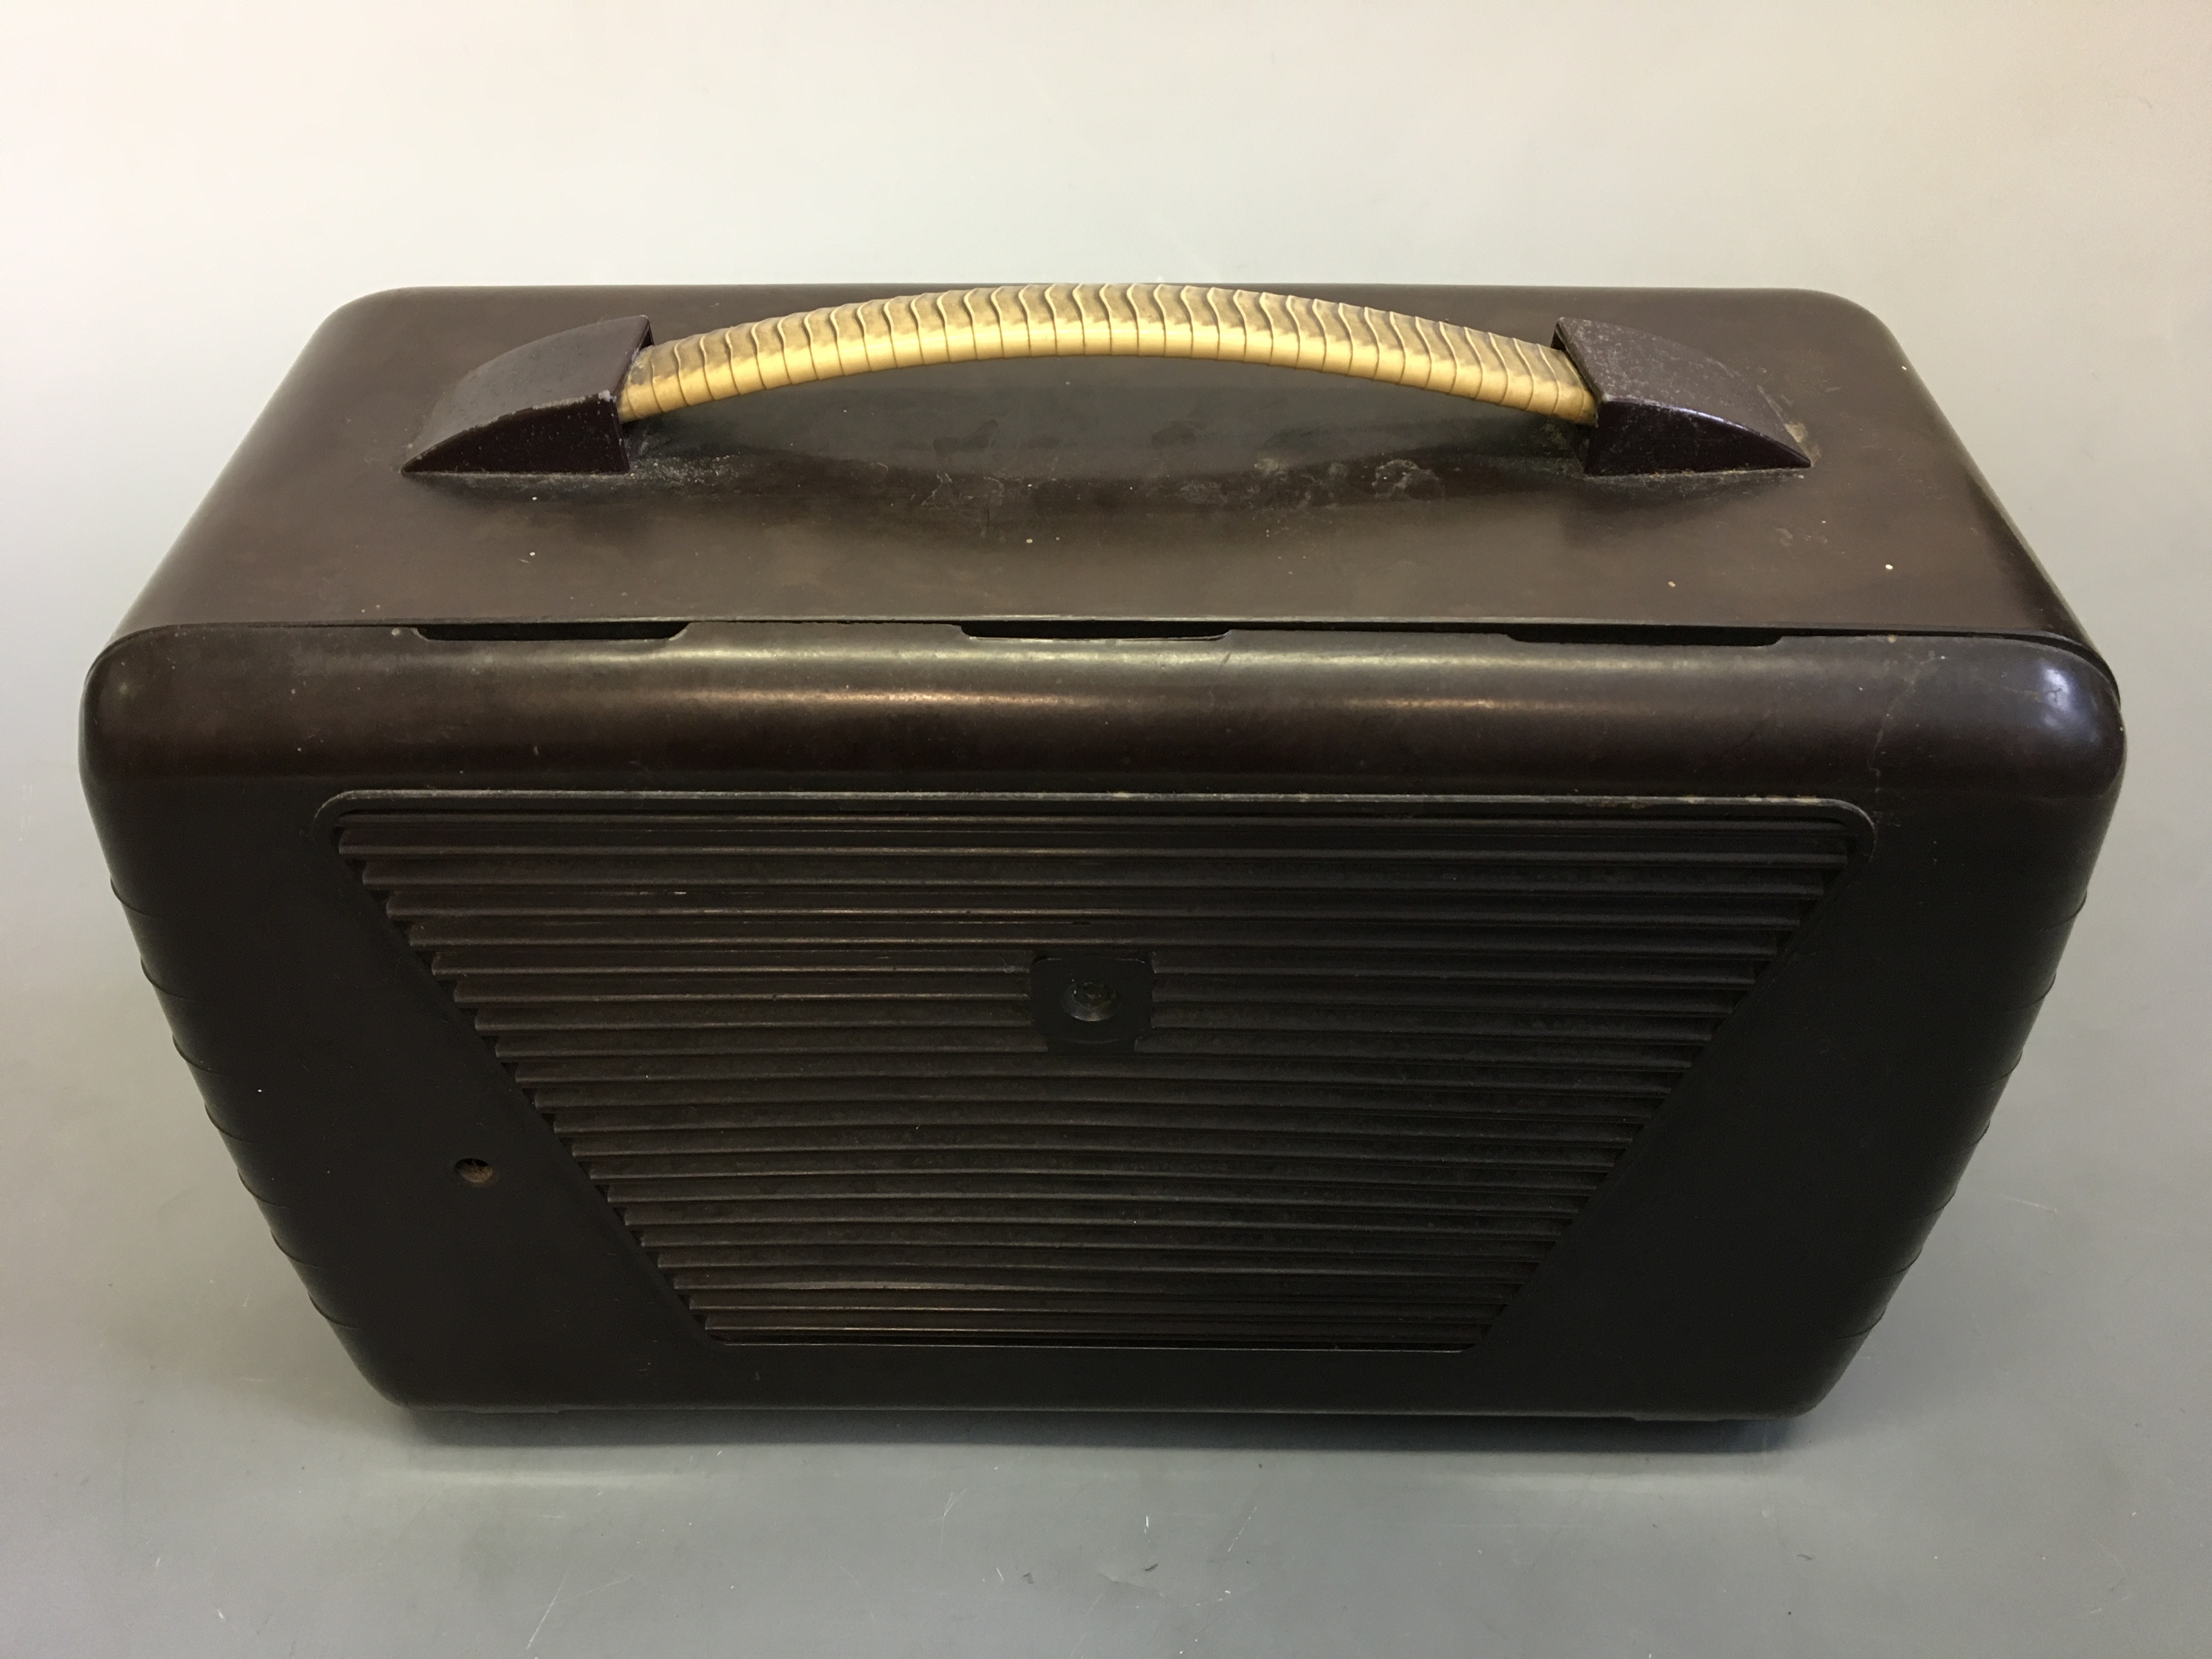 An Ultra Twin cream and brown Bakelite radio. IMPORTANT: Online viewing and bidding only. No in - Image 3 of 4